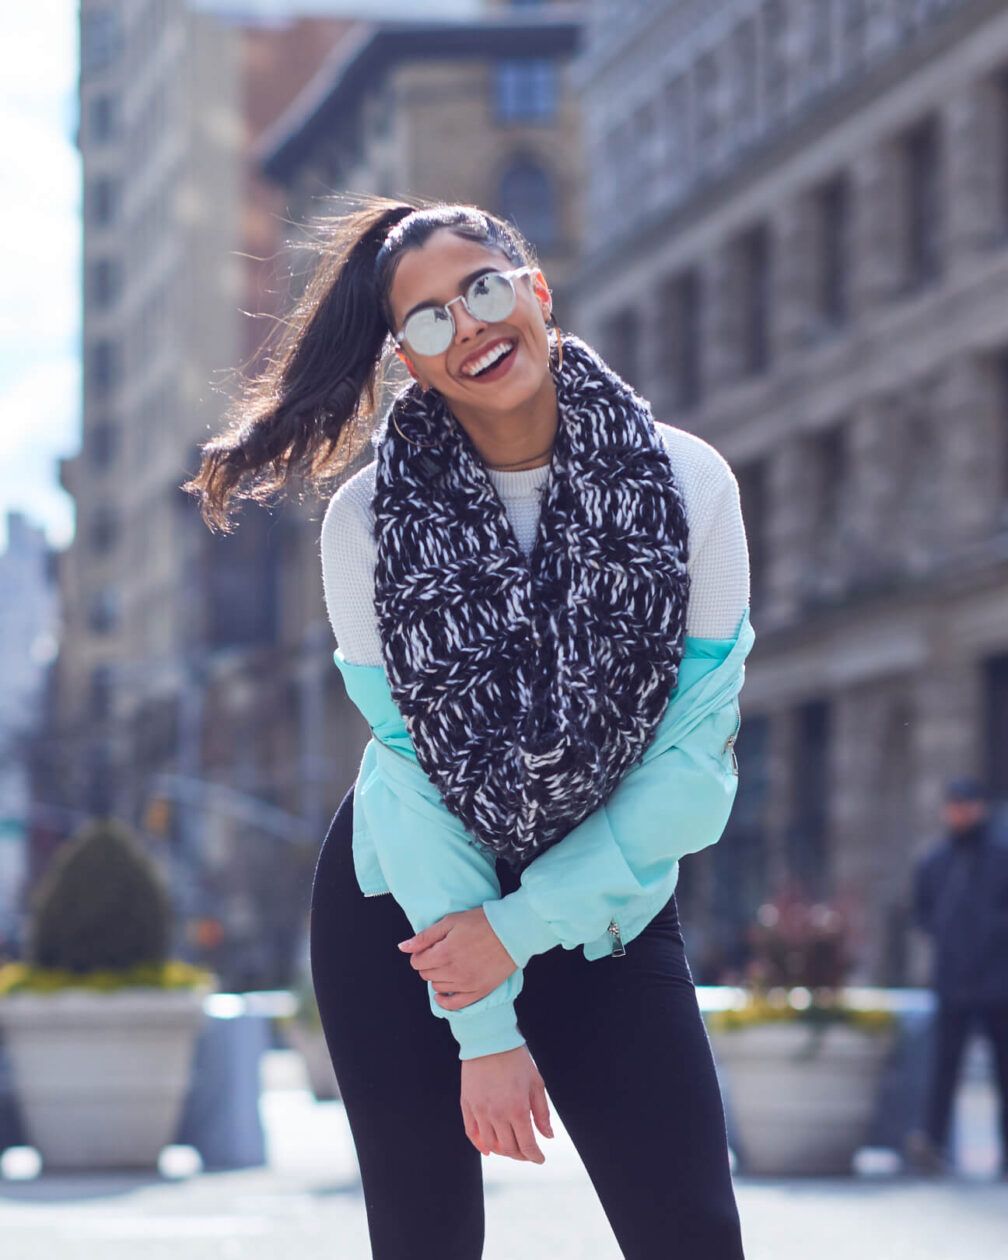 Emily - Flatiron District - Fashion Photography - New York - Woman with a scarf and sunglasses - Street Photography - Fuji X Pro2 with xf 56mm f1.2